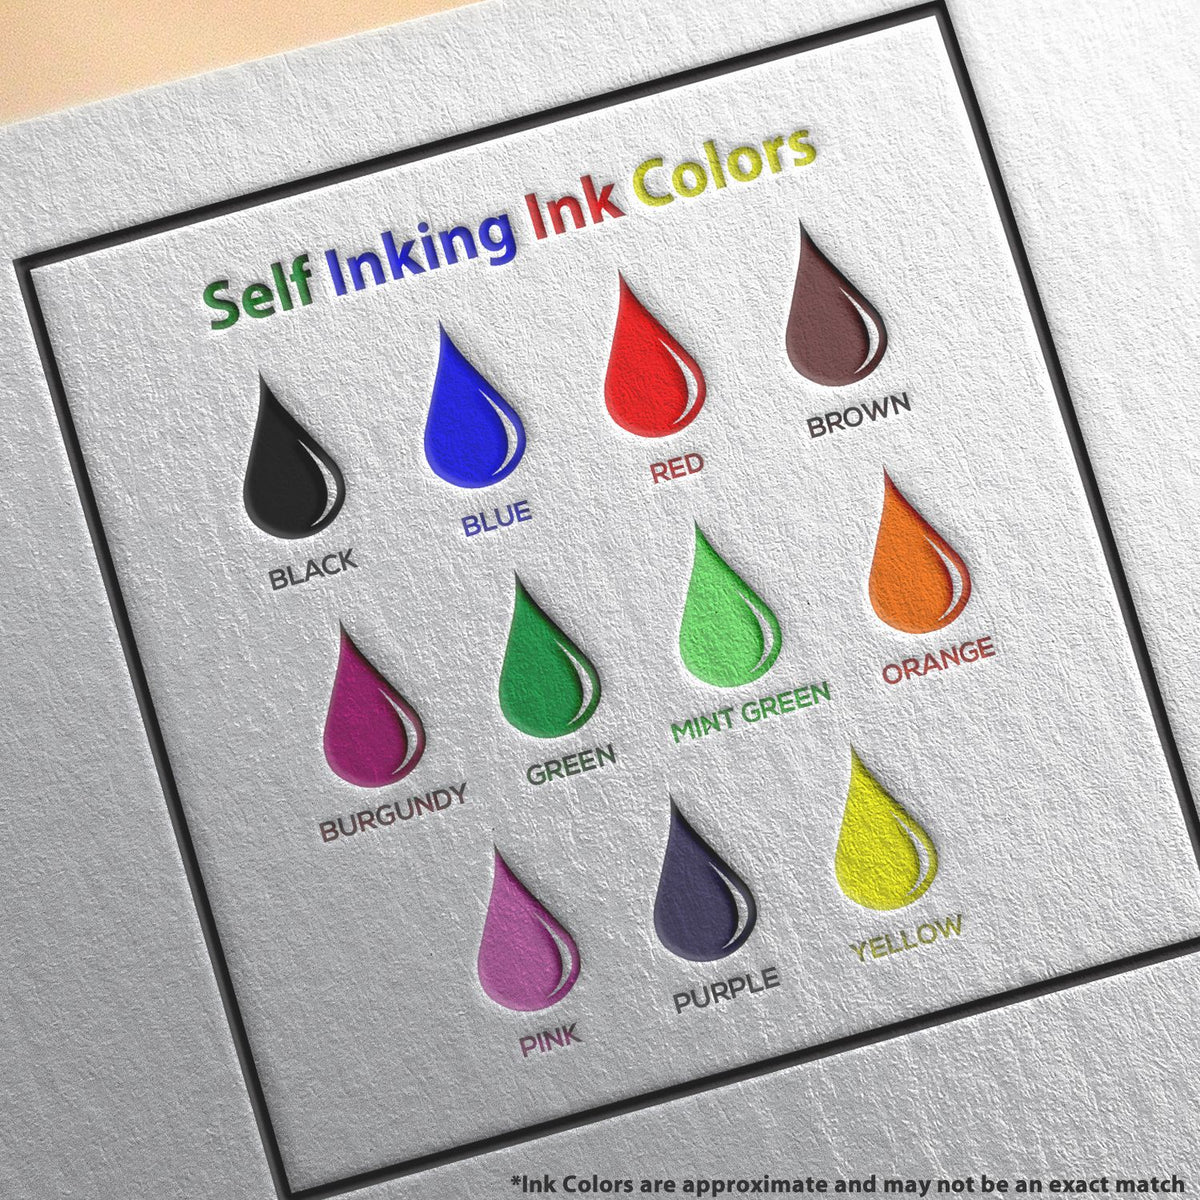 A picture showing the different ink colors or hues available for the Self-Inking Arkansas Landscape Architect Stamp product.